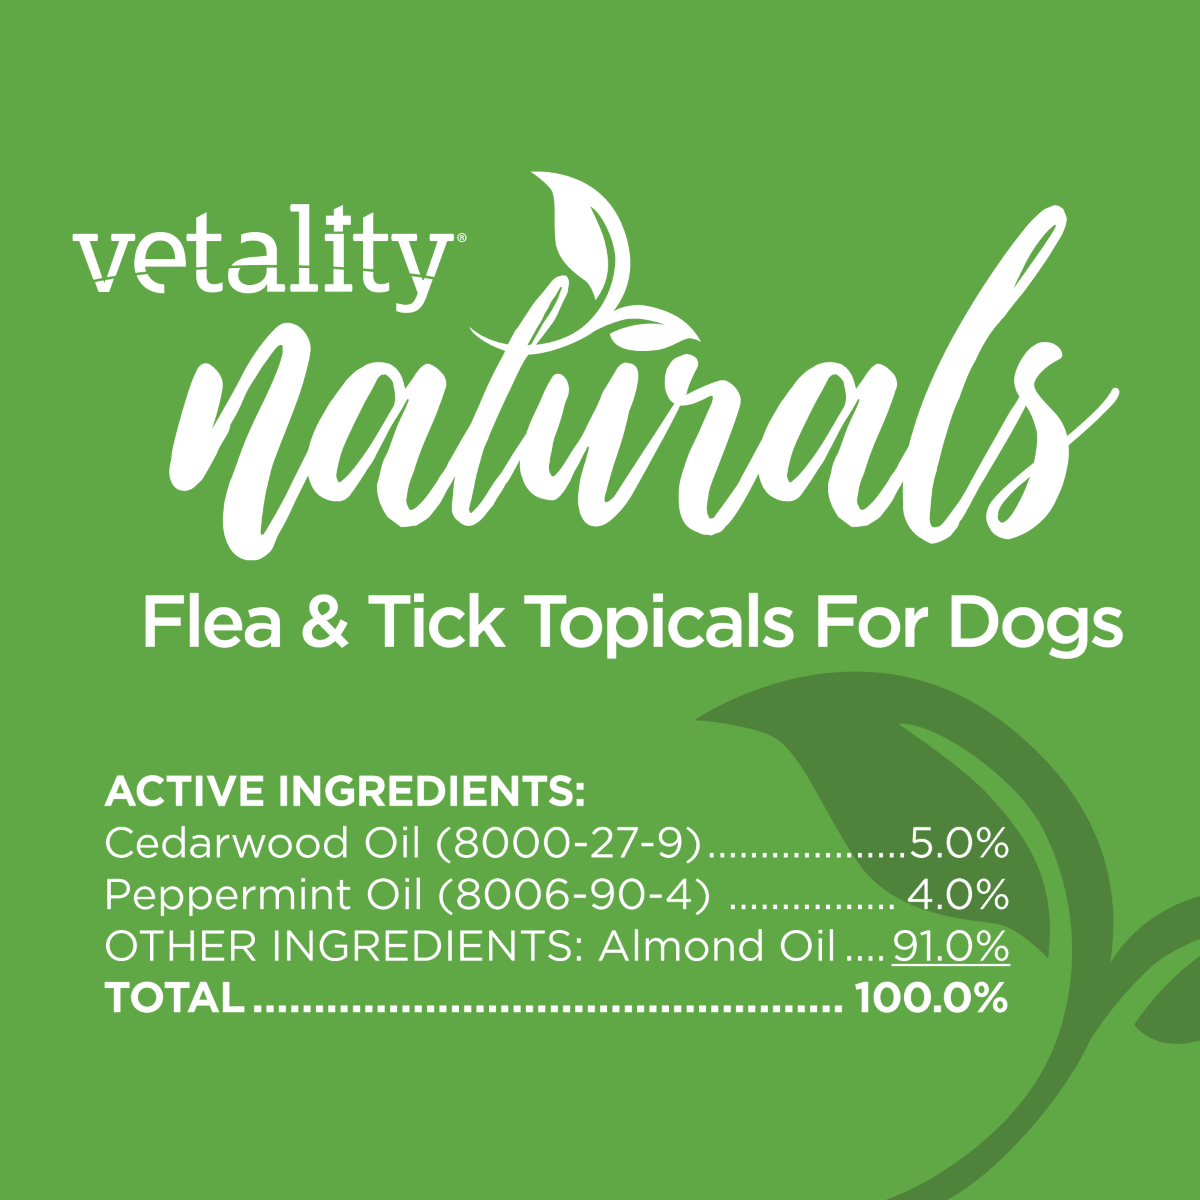 Vetality Naturals Flea & Tick Topicals for Dogs, 3 Doses